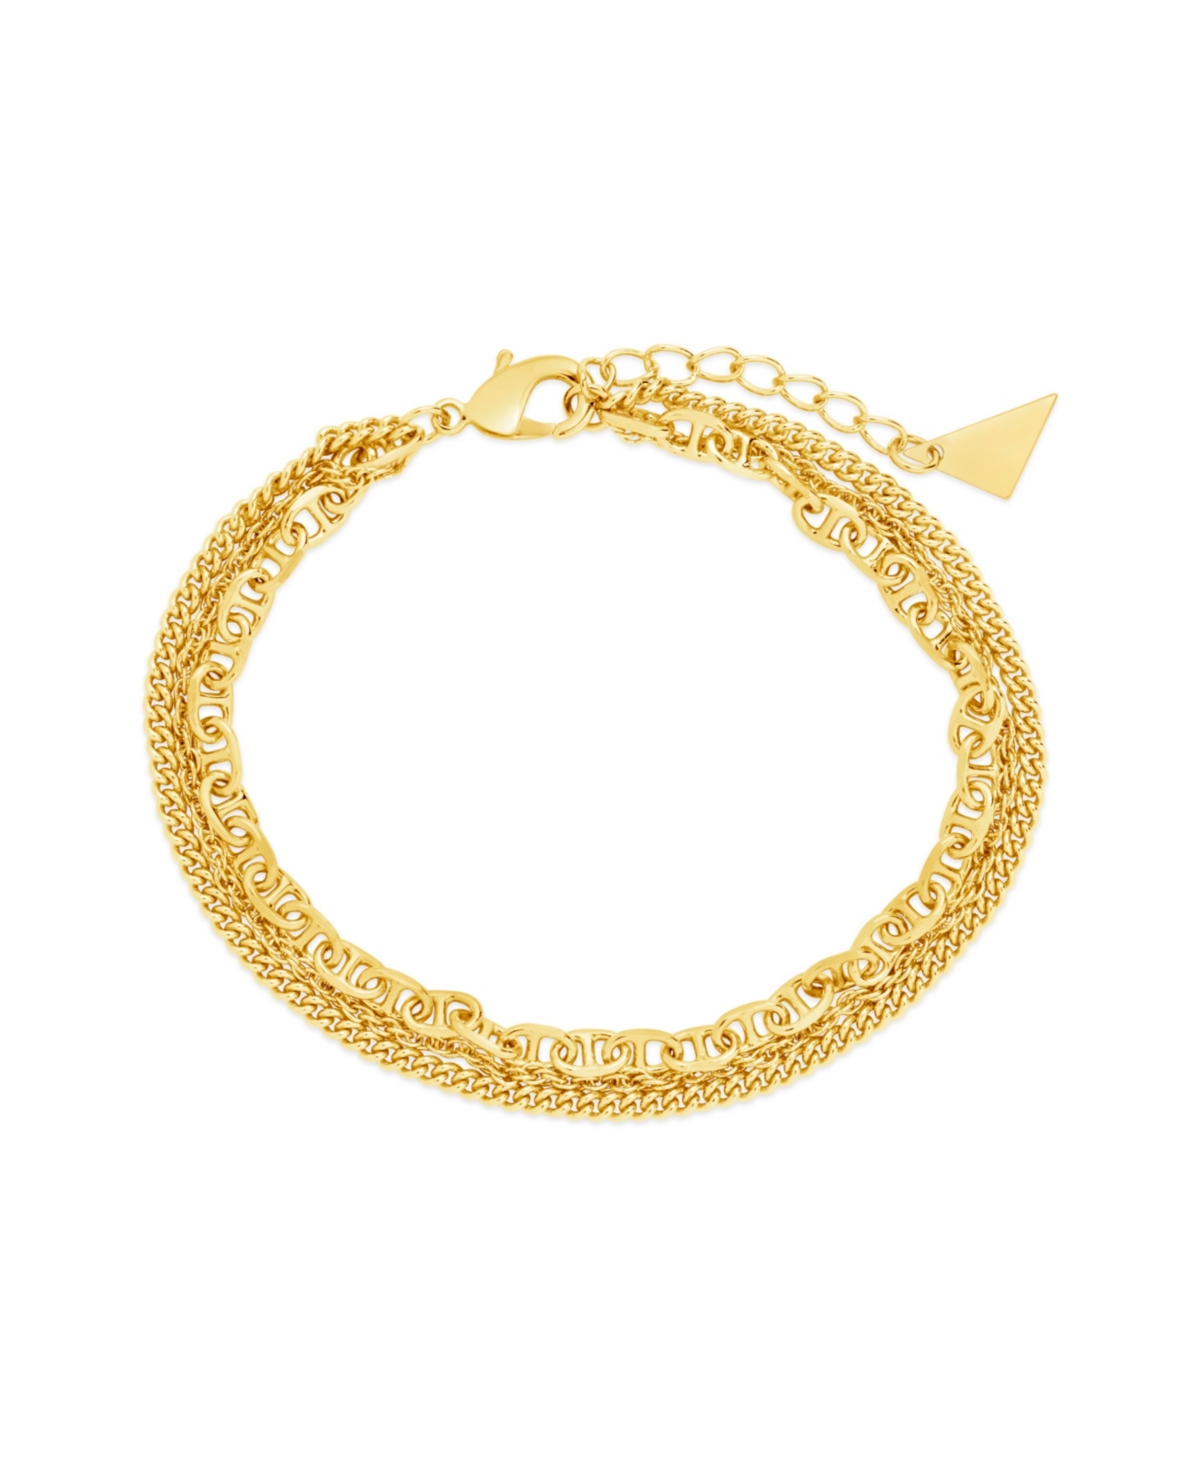 14K Gold Plated or Rhodium Plated Triple Chain Nevaeh Bracelet - Silver